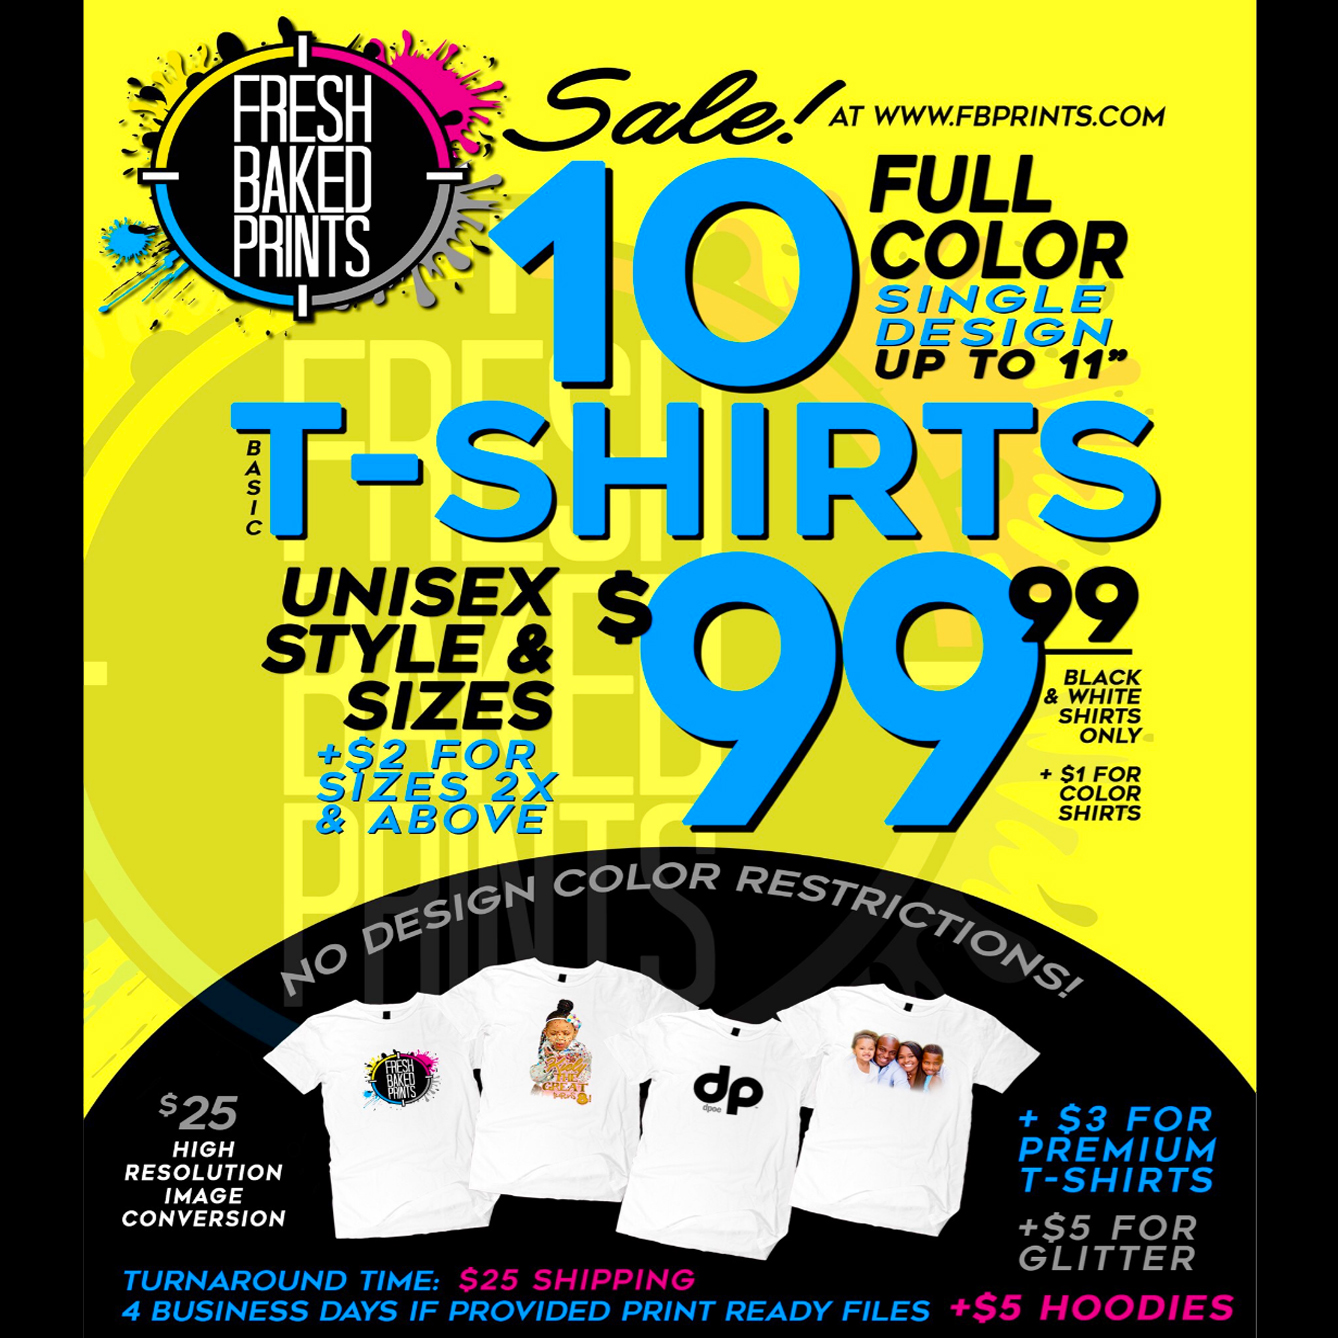 Bulk and Wholesale T-Shirts + Apparel for Printing